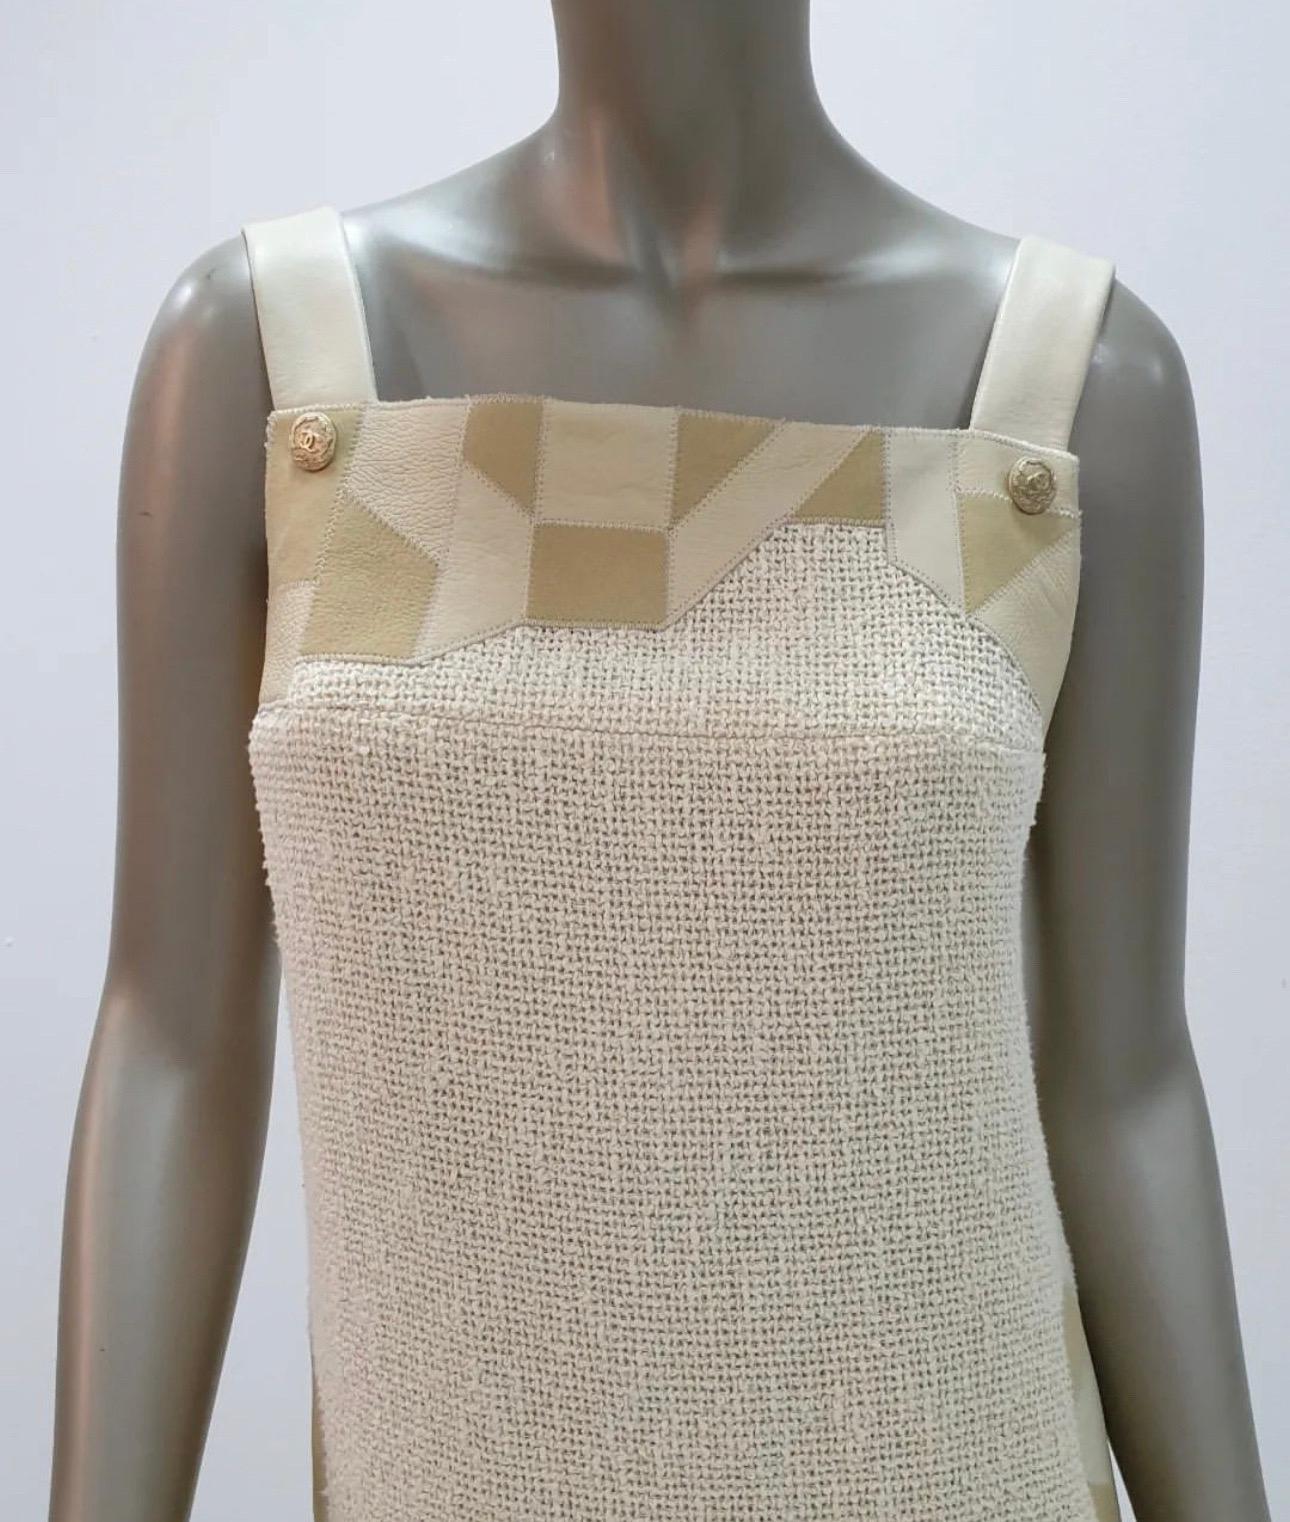 Chanel spring 2010 dress
Very rare dress
Sz.38
Excellent condition